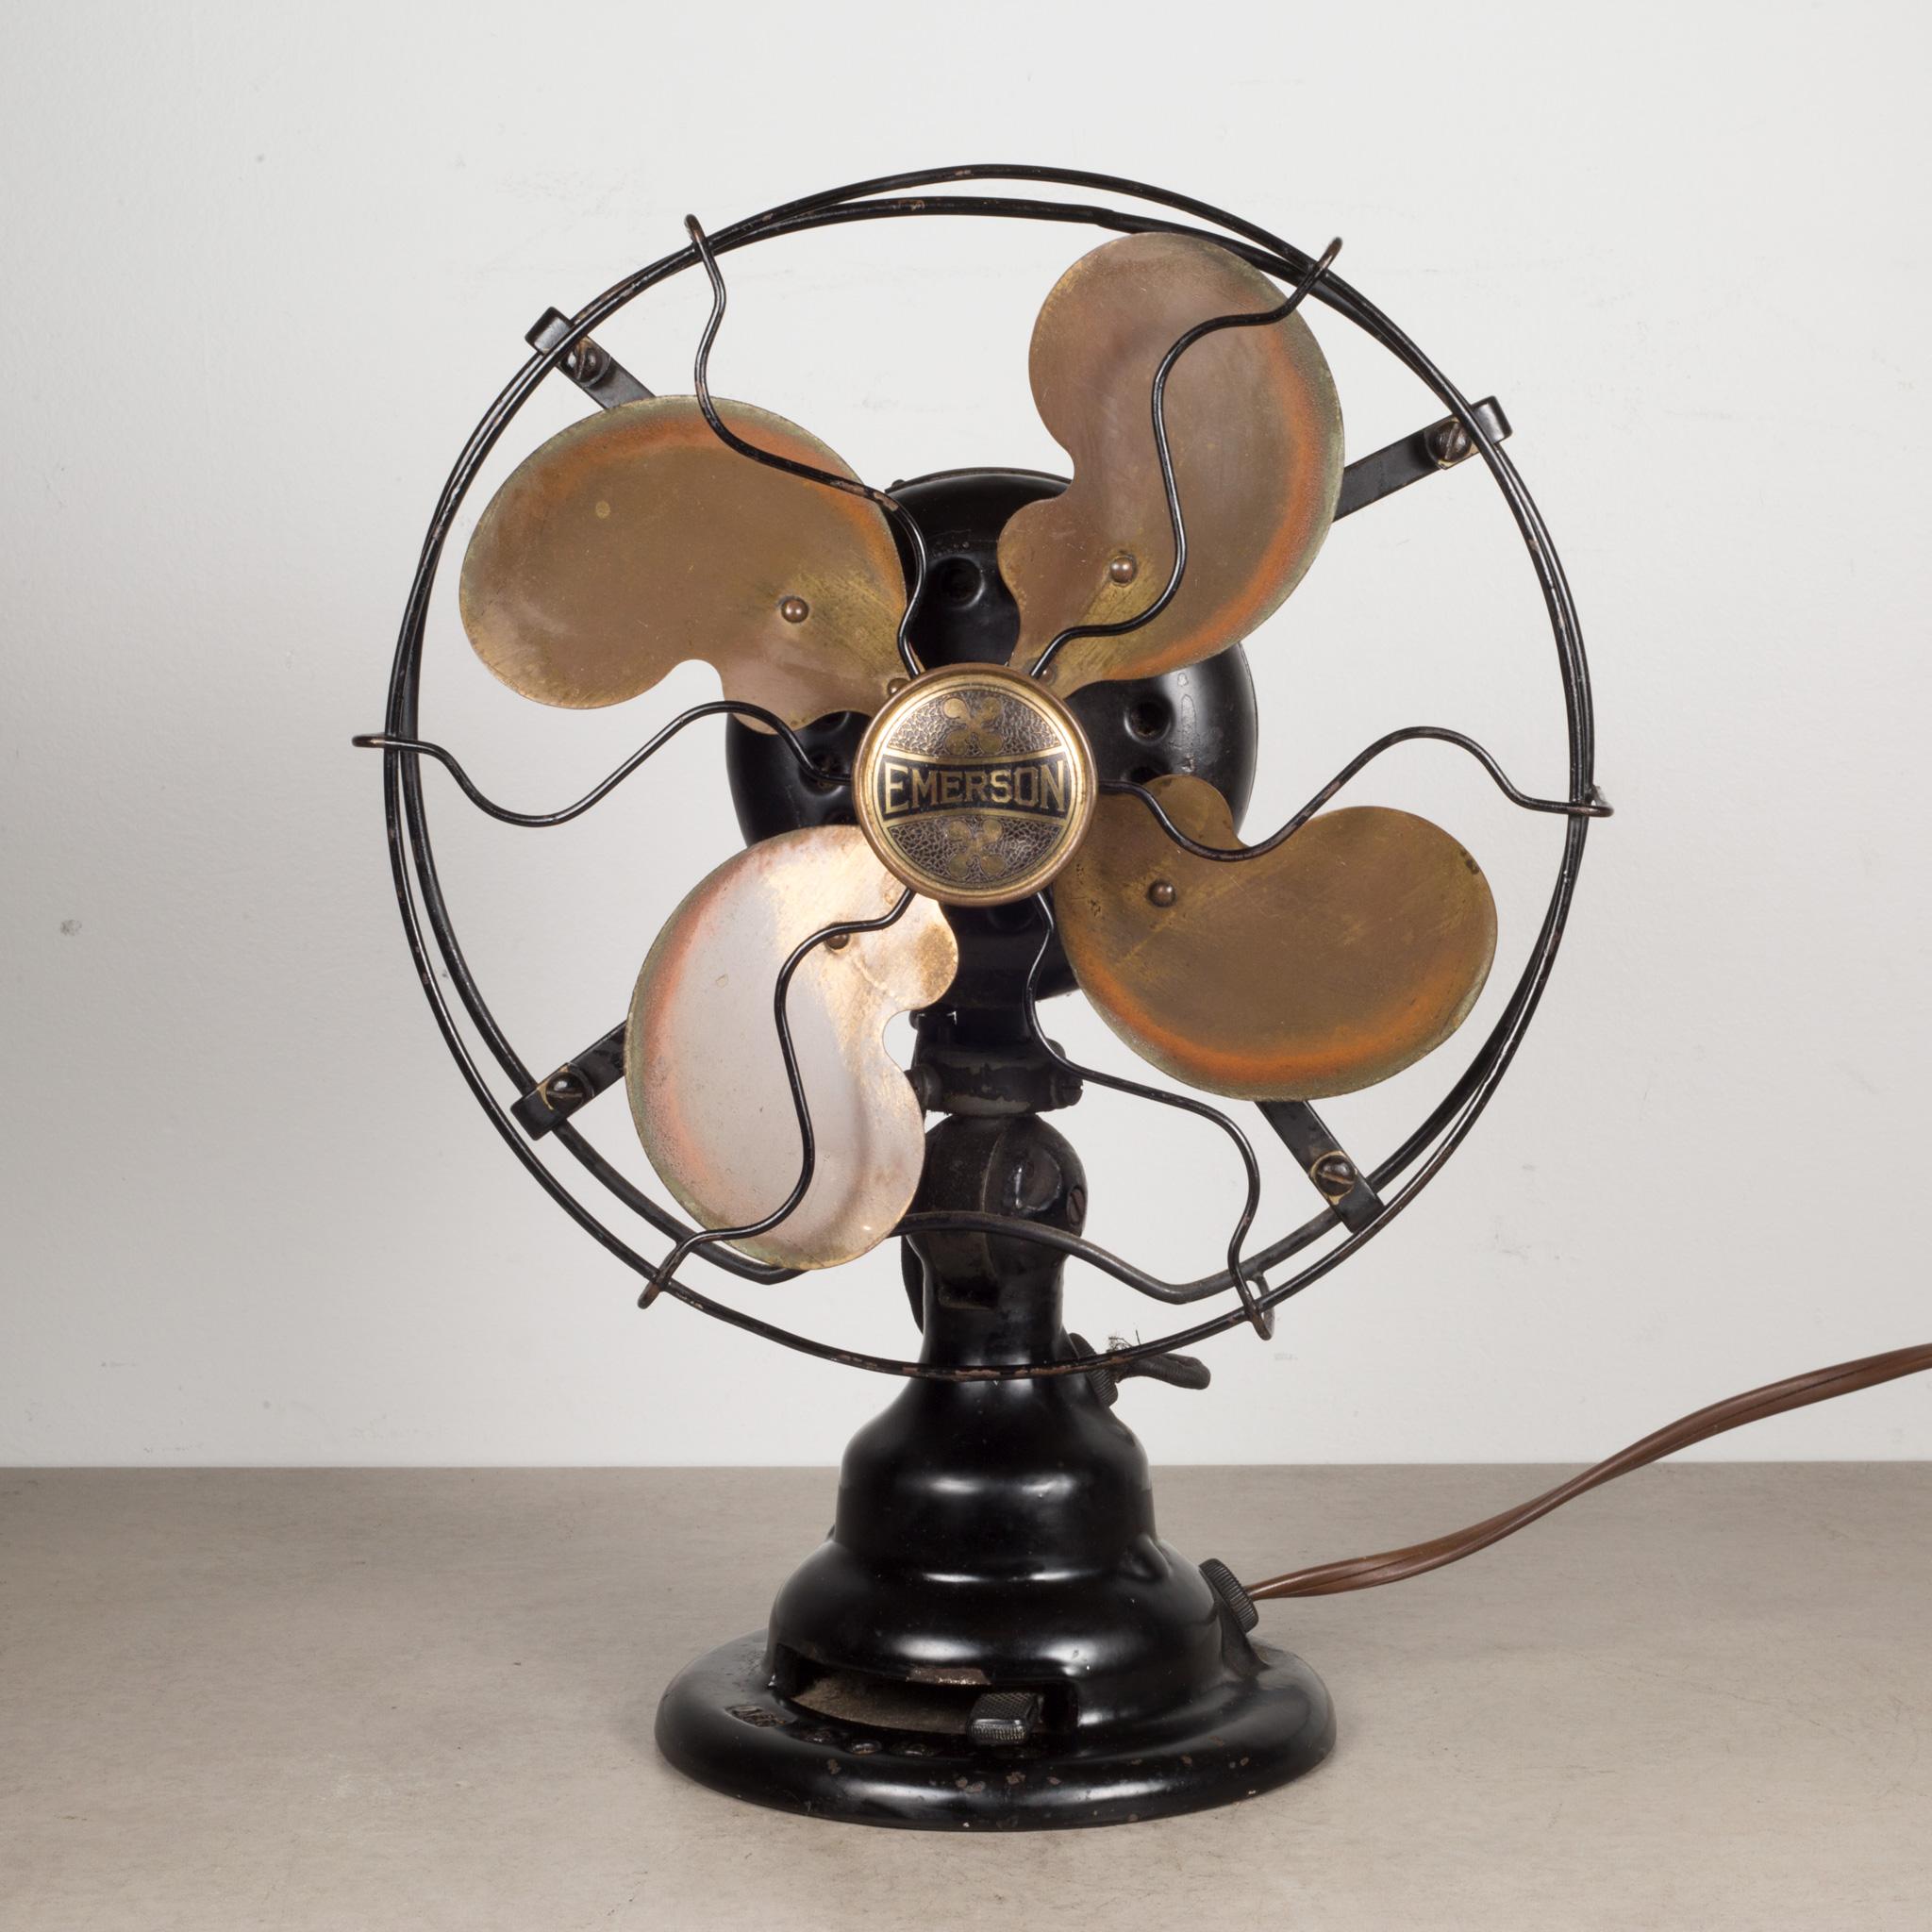 About

An original Emerson cast iron and metal oscillating fan with brass plated blades tilting head, three power settings, original front plate and original metal label. The wiring is good and the fan is in working condition with quiet but